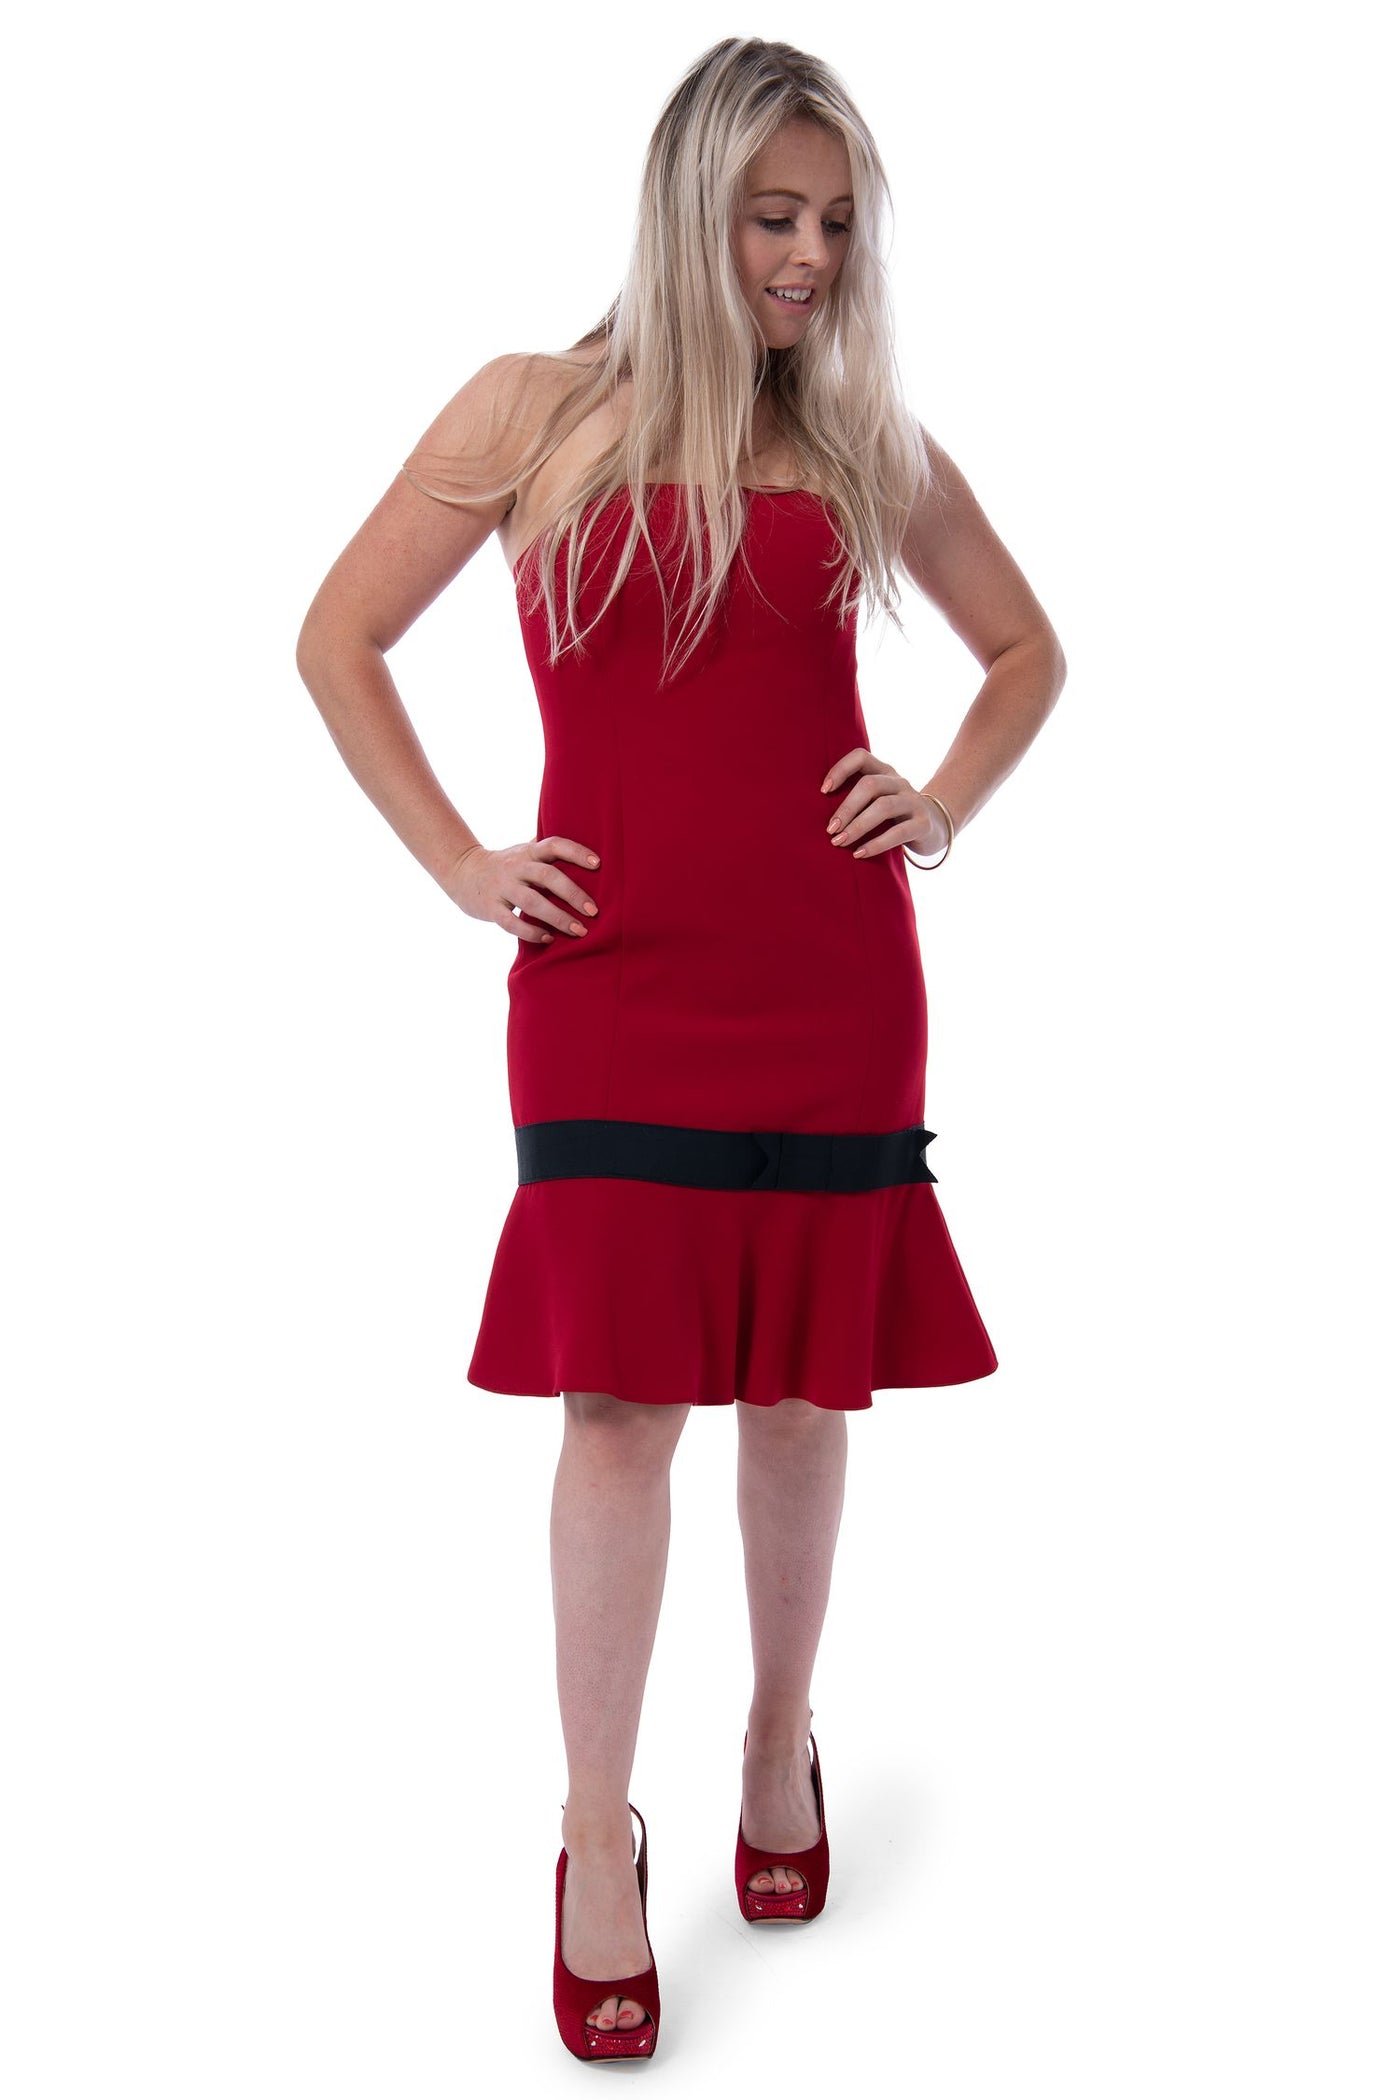 Liz Claiborne Red Strappless Dress With Navy Bow